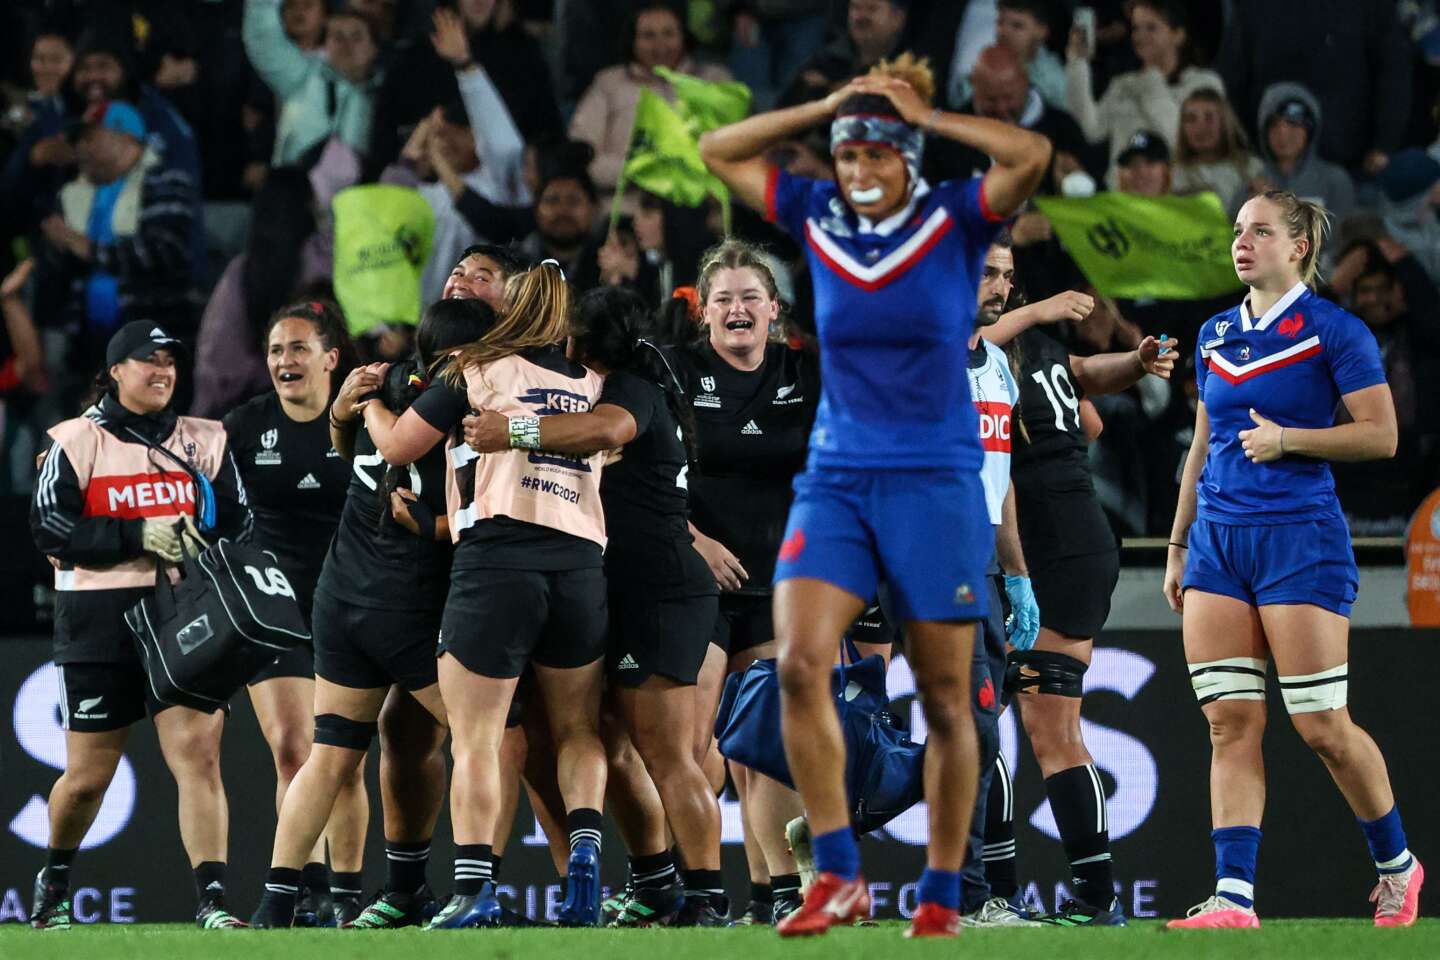 Defeated by New Zealand in the suspense finale, the Blues fail to reach the final gates